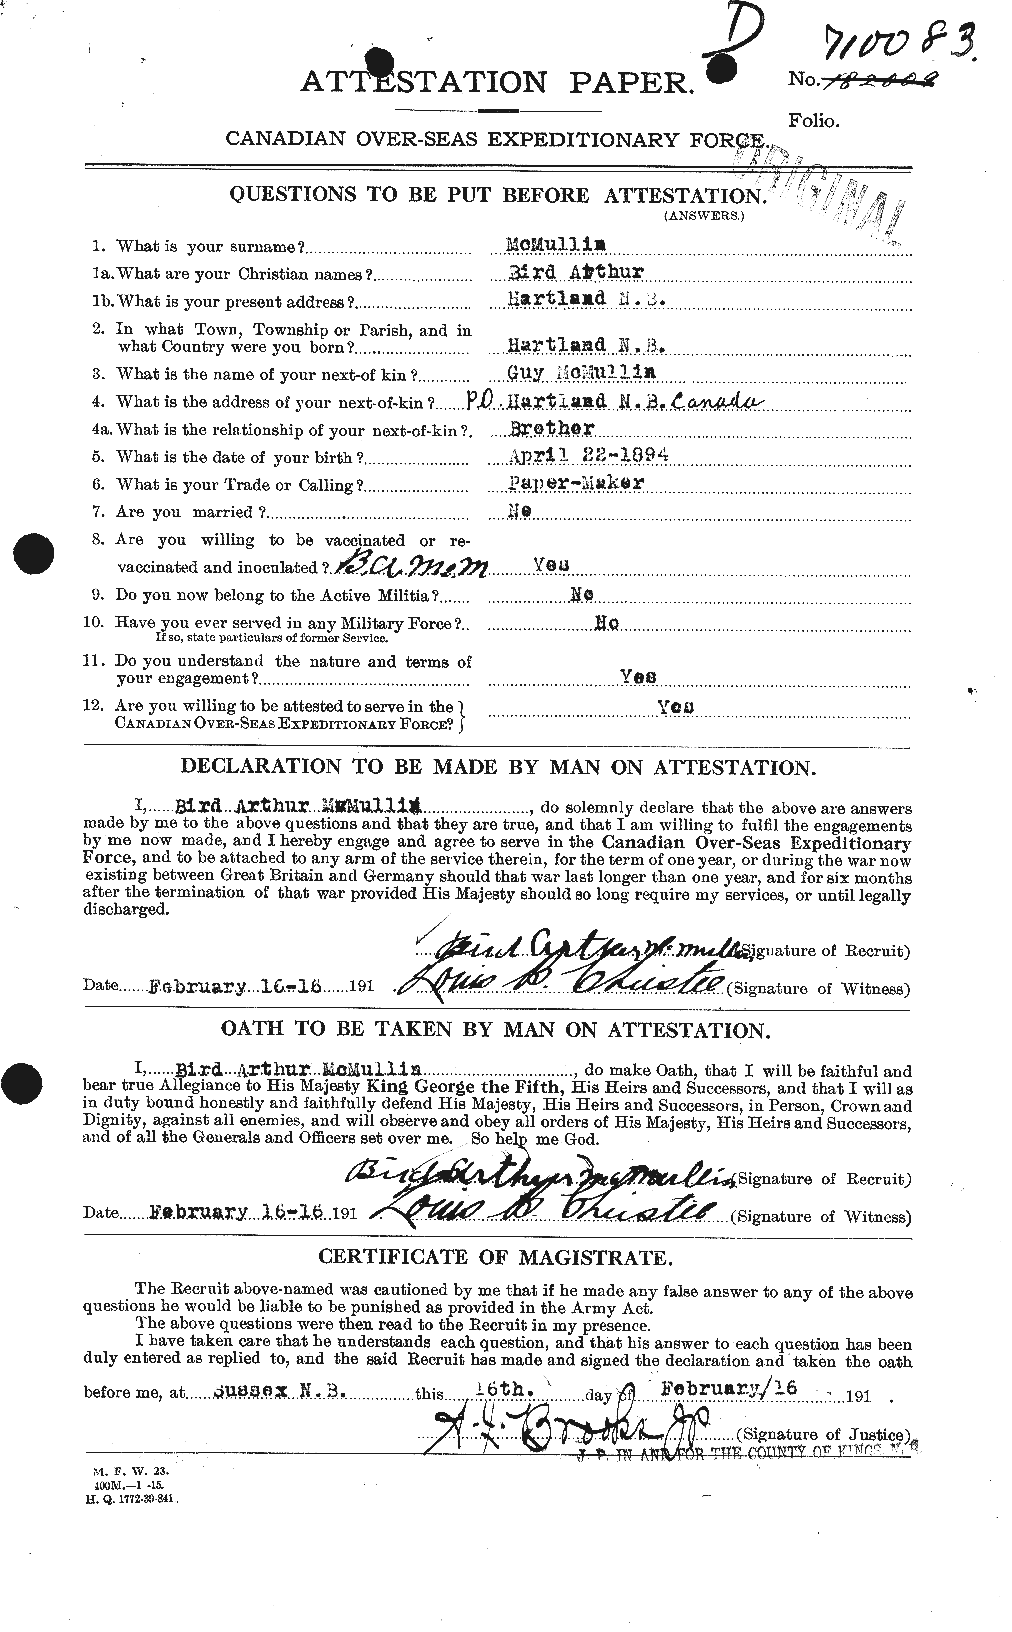 Personnel Records of the First World War - CEF 538896a